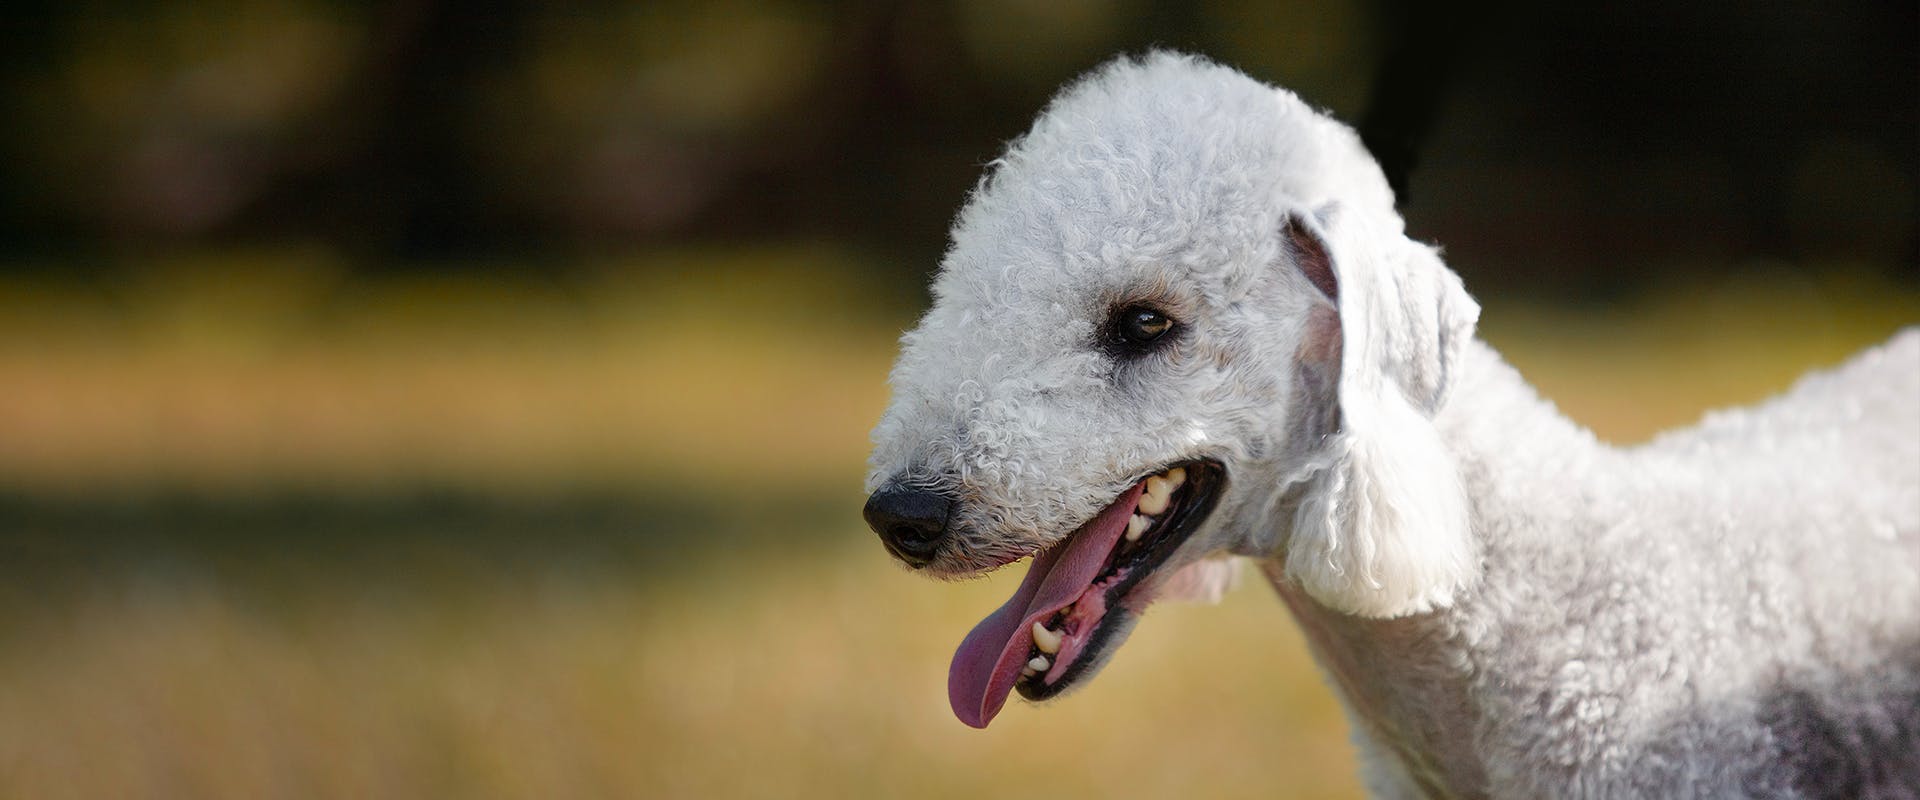 A Bedlington Terrier dog standing and panting in a field, which is blurred out in the background 